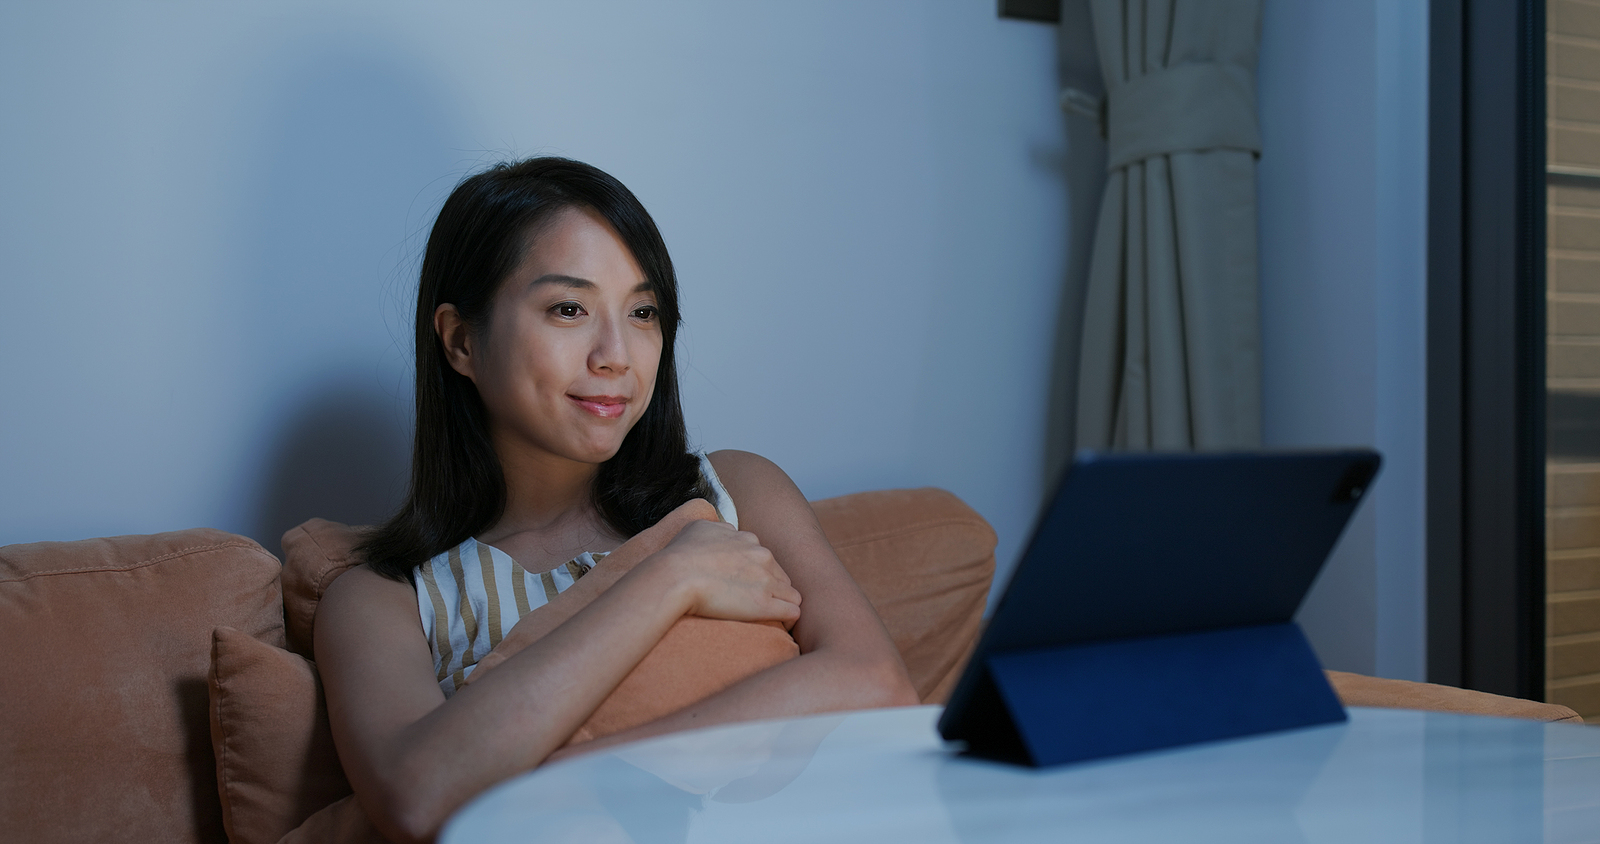 An asian woman smiles as she watches something on her device while holding a pillow.